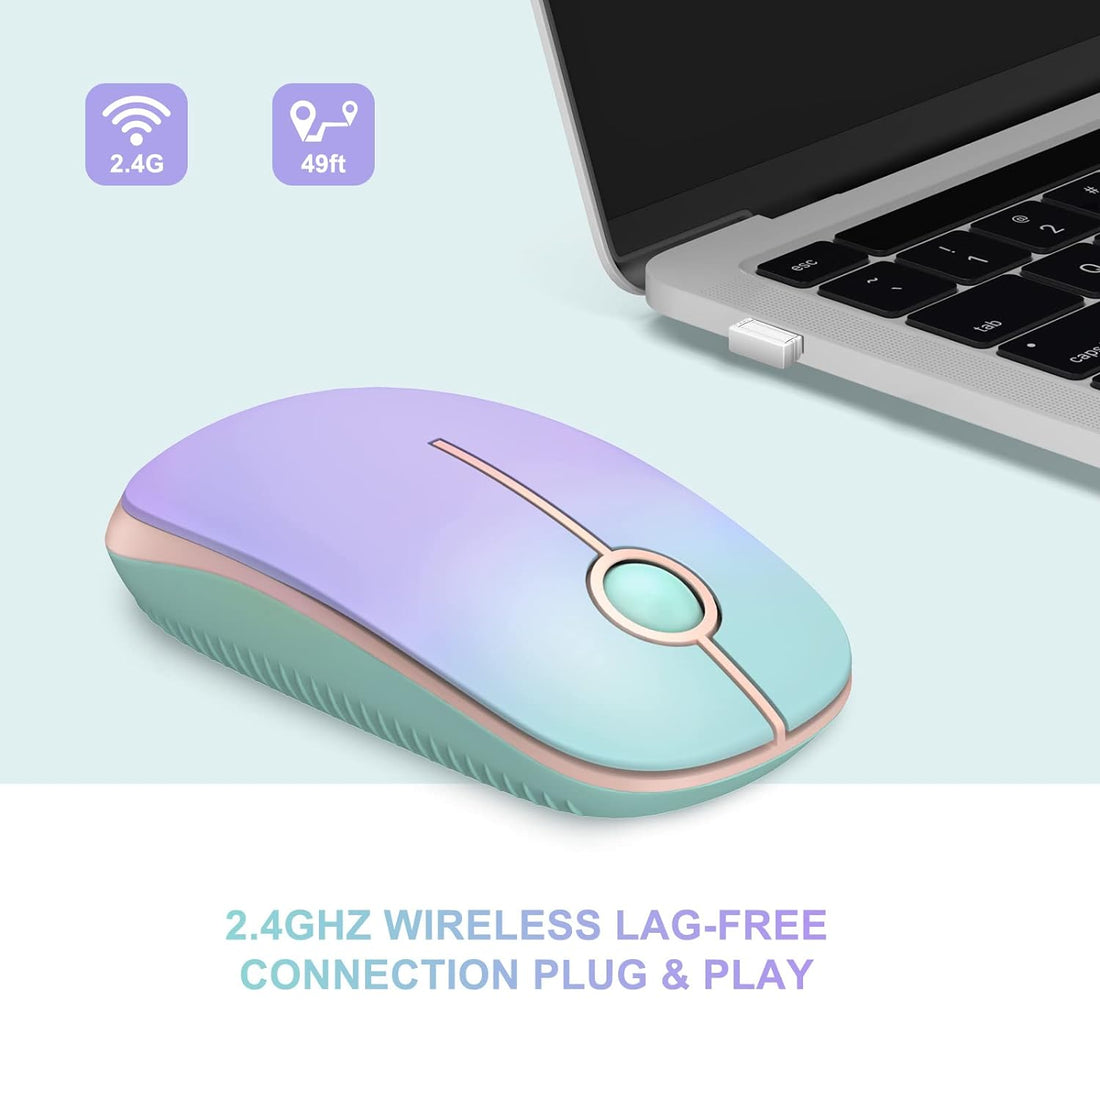 Unipows Wireless Mouse - 2.4G Slim Portable Computer Mouse with Nano Receiver, Less Noise Mobile Optical Mice for Notebook, PC, Laptop, Computer, Mac (Gradient Mint Green to Purple)